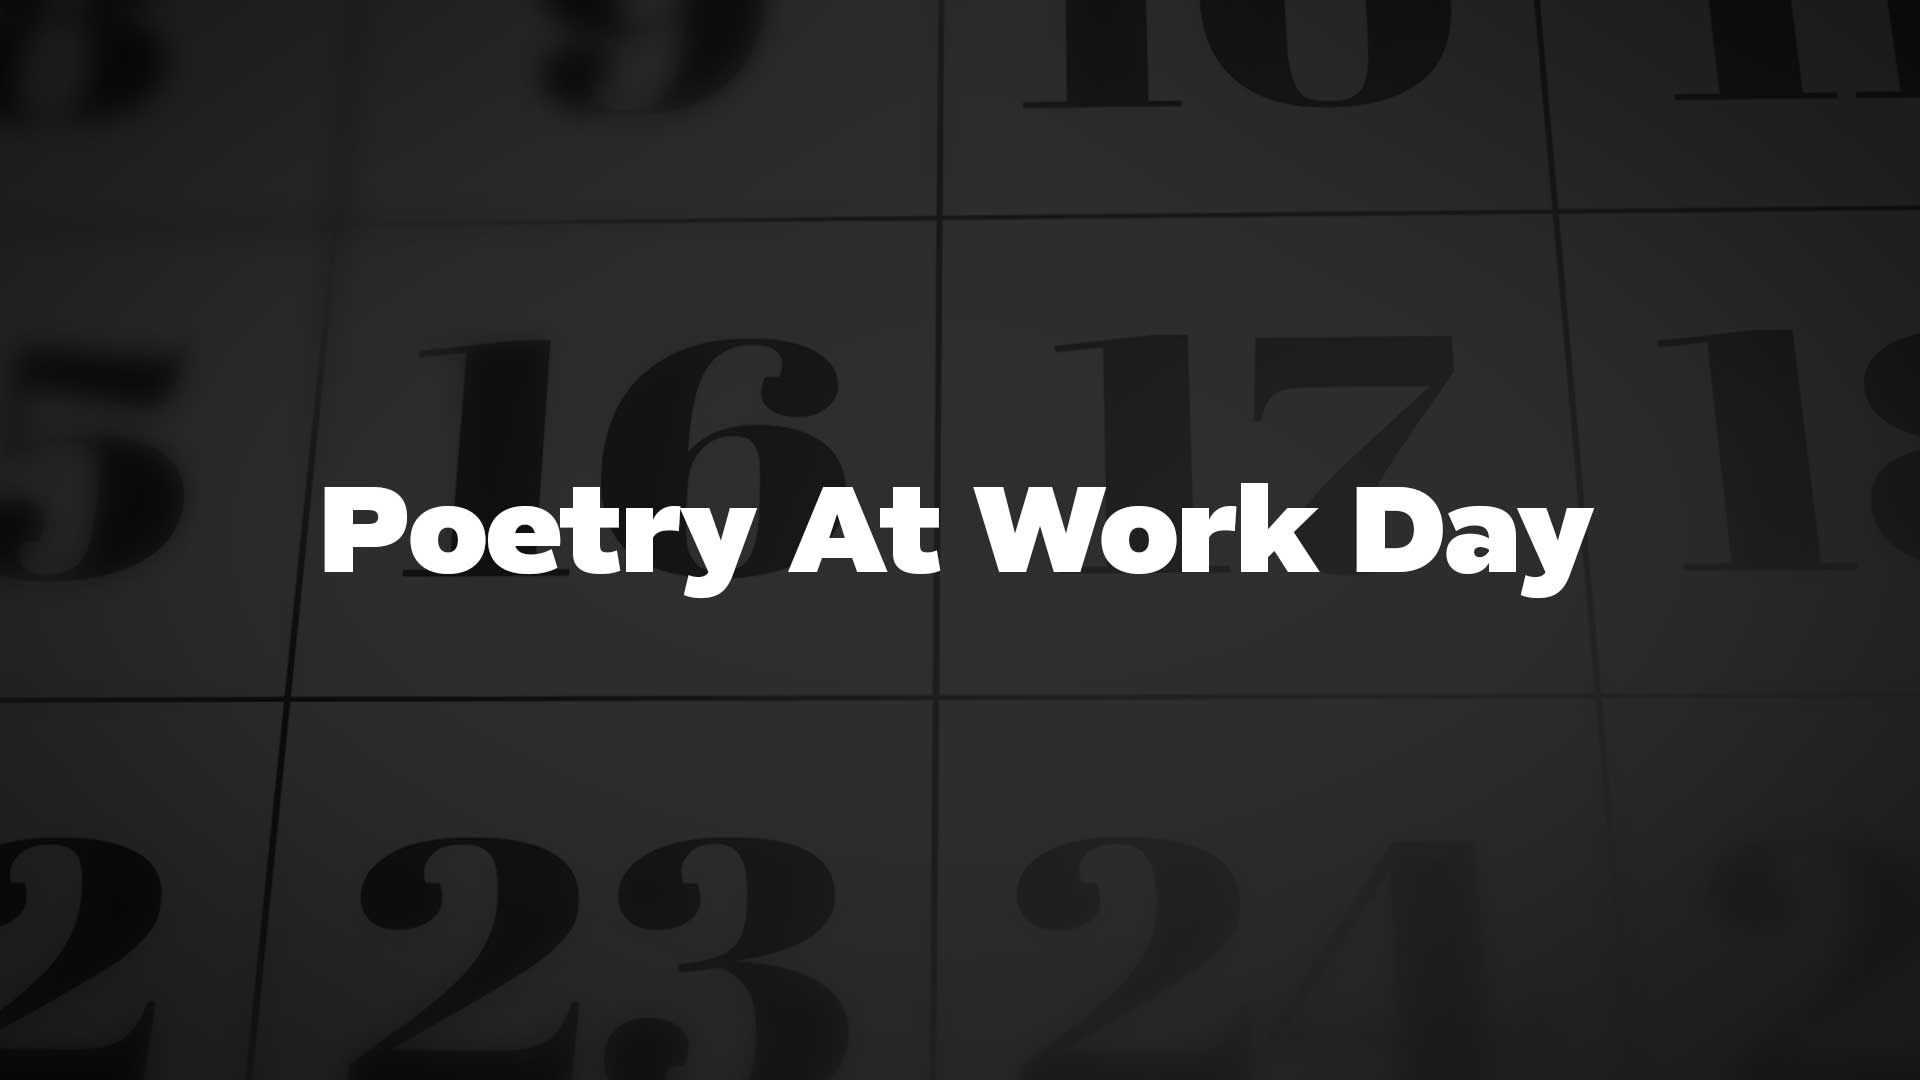 PoetryAtWorkDay List Of National Days